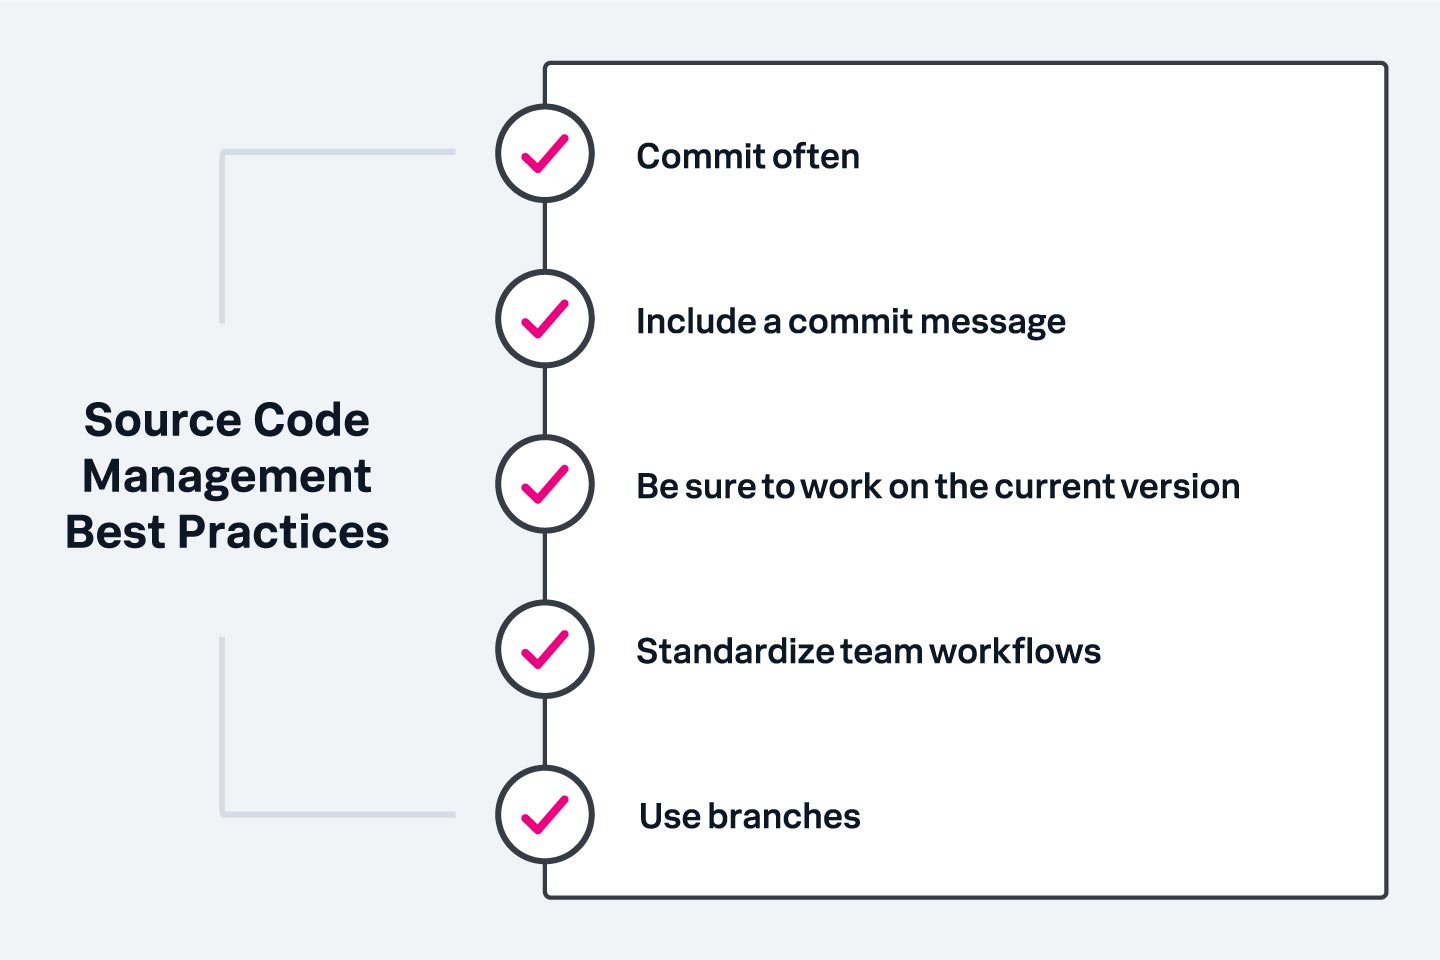 Source code management has several best practices